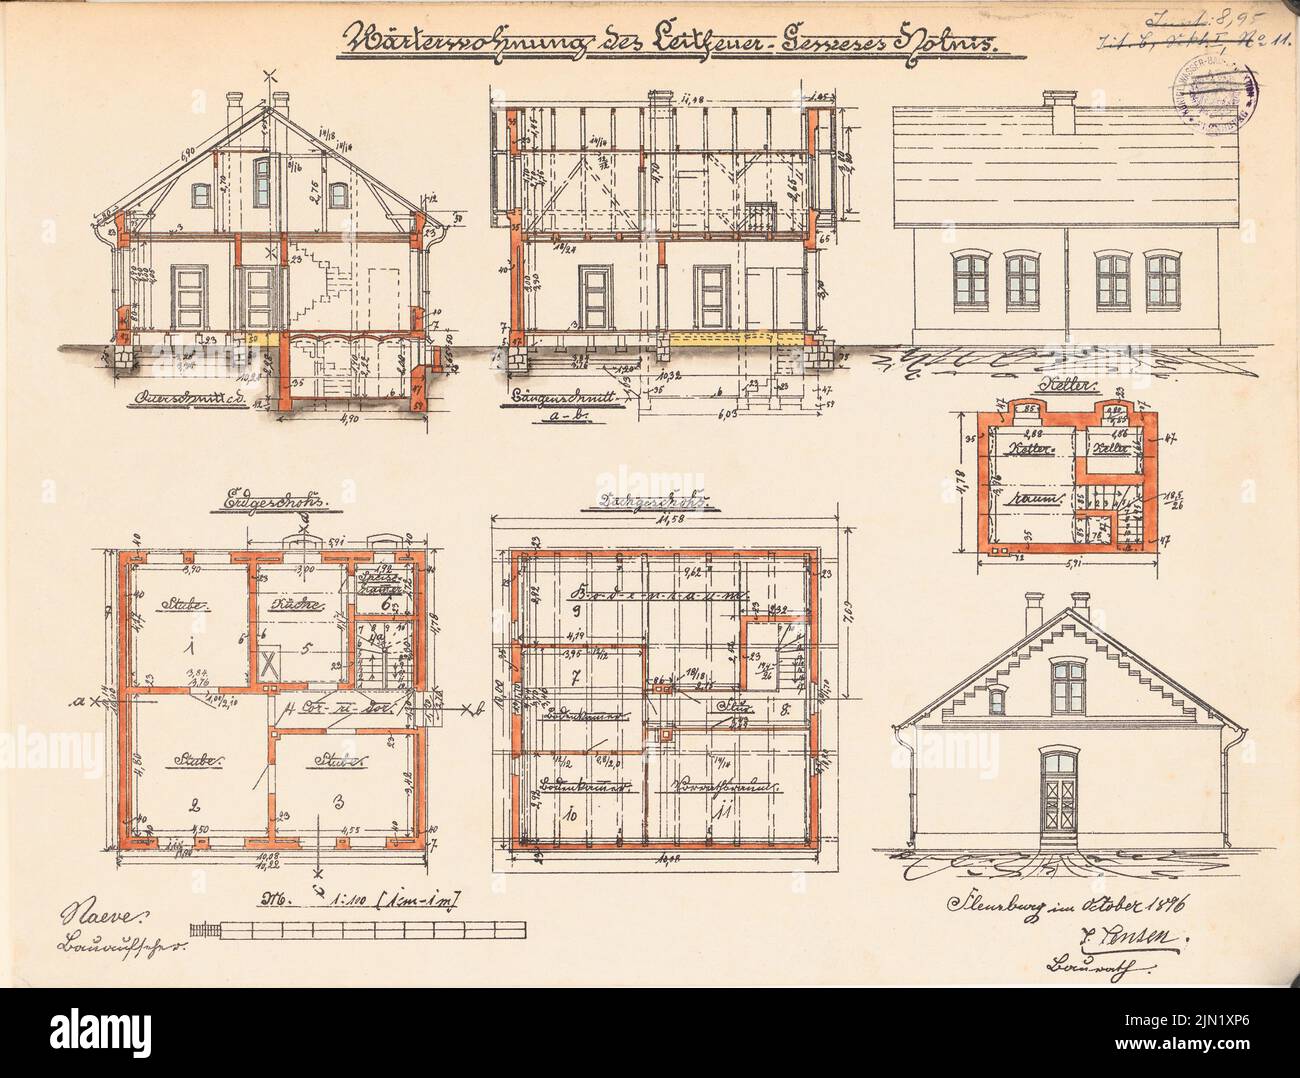 N.N., leading fire building, Holnis: WORTERHAUS: views, floor plans, cuts 1: 100. Lithograph colored on paper, 32.6 x 43 cm (including scan edges) N.N. : Leitfeuergebäude, Holnis Stock Photo